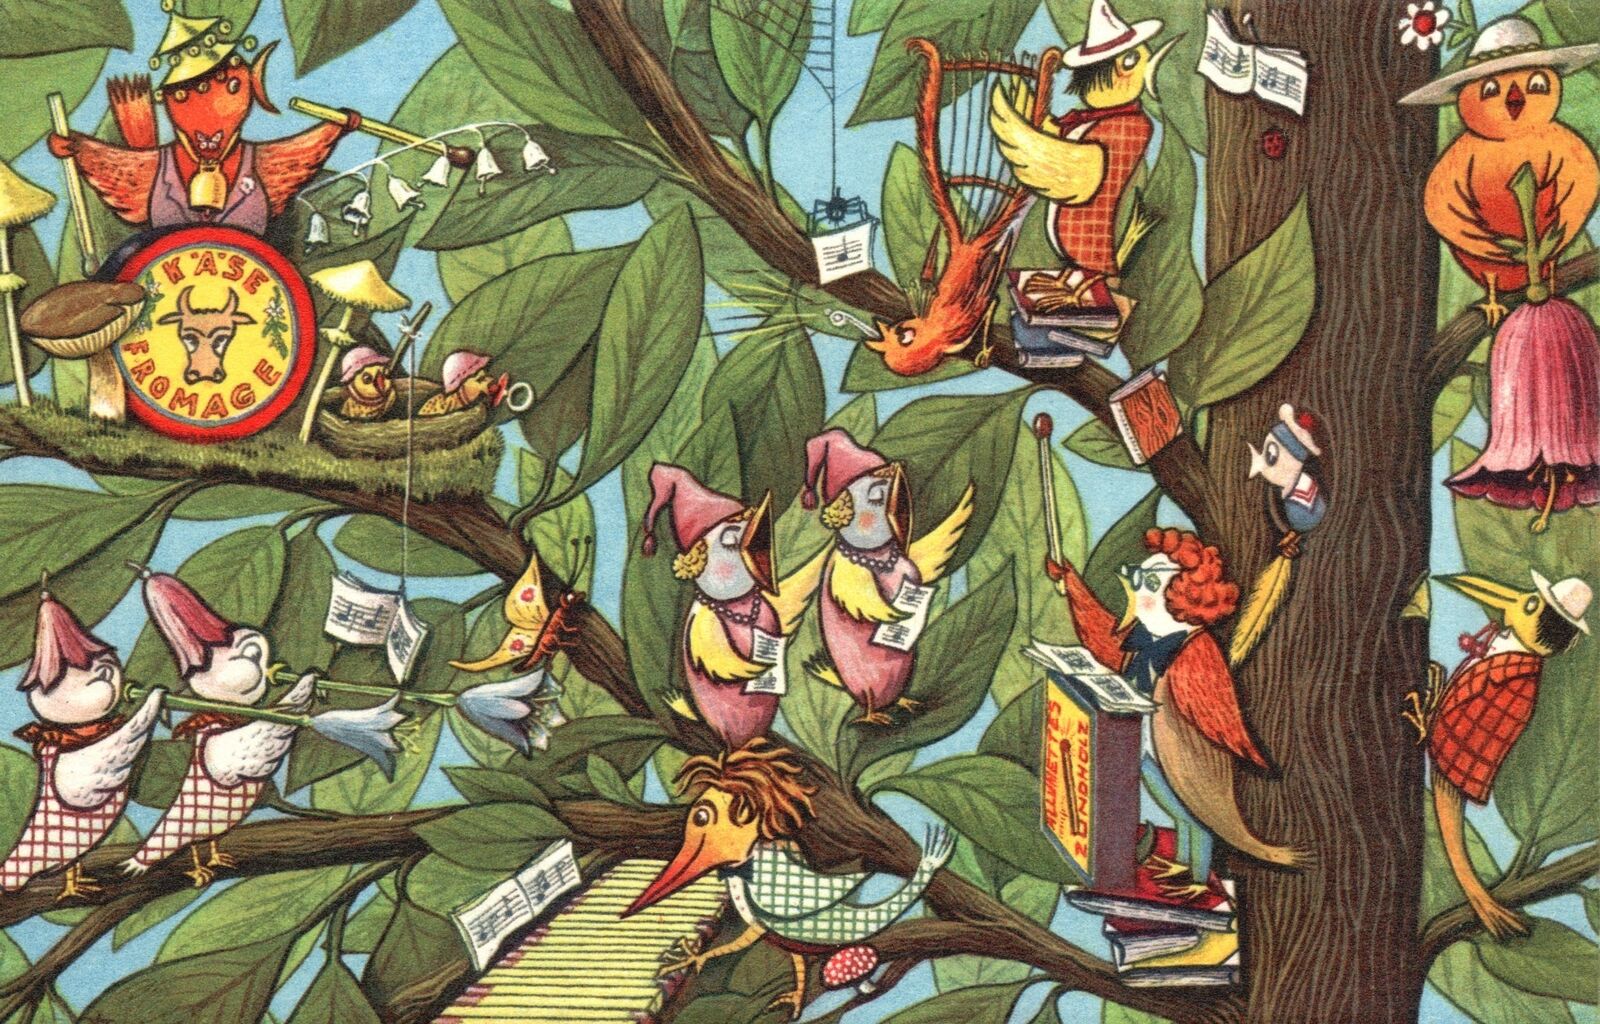 Vintage Postcard 1960 Group Of Birds Playing Music Instruments & Singing On Tree